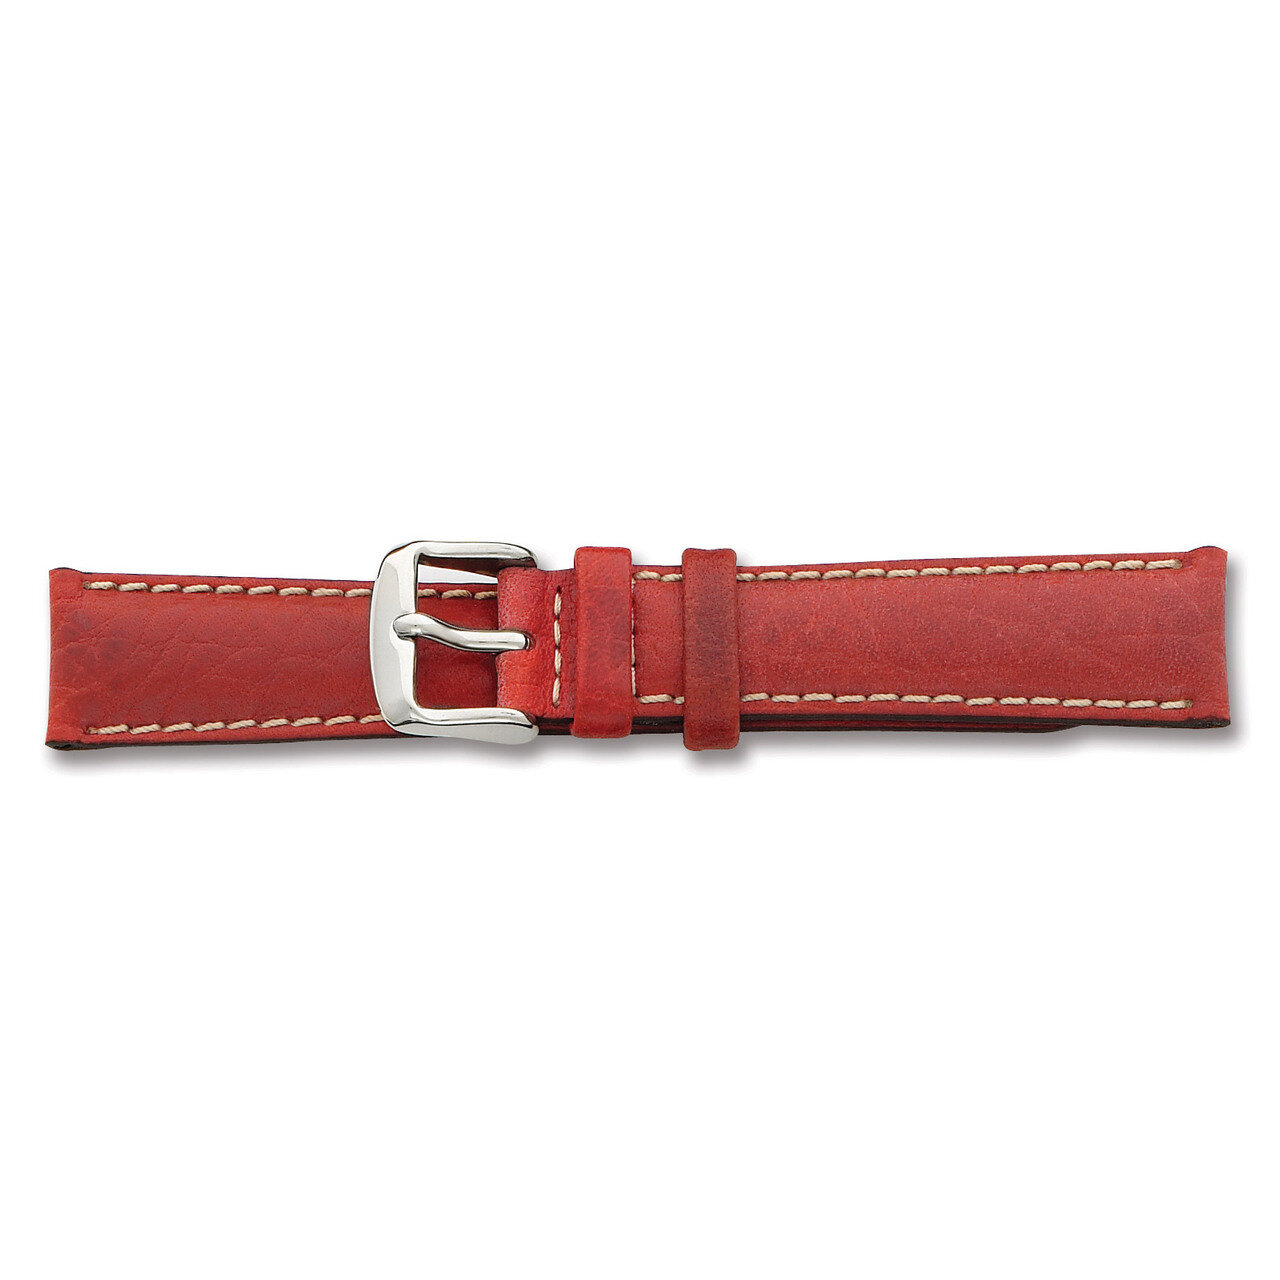 19mm Red Sport Leather White Stitch Watch Band 7.5 Inch Silver-tone Buckle BA138-19